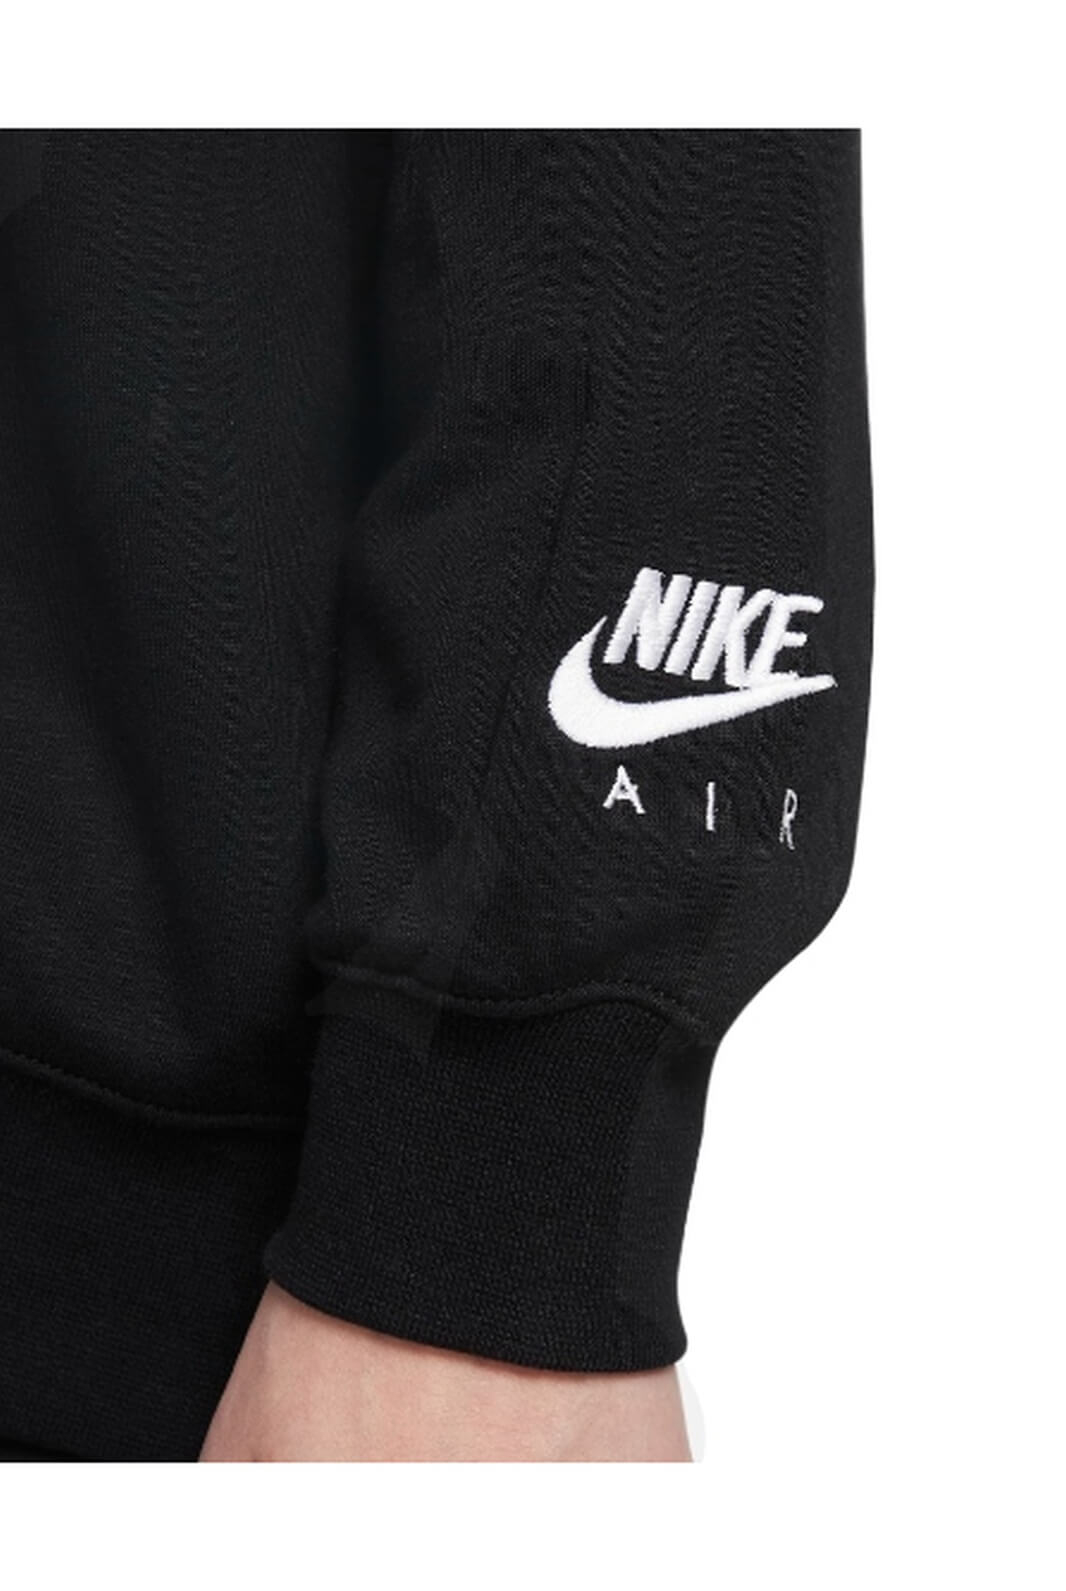 shocking weather Completely dry Hanorac NIKE Air Fleece Graphics - DD5417-010